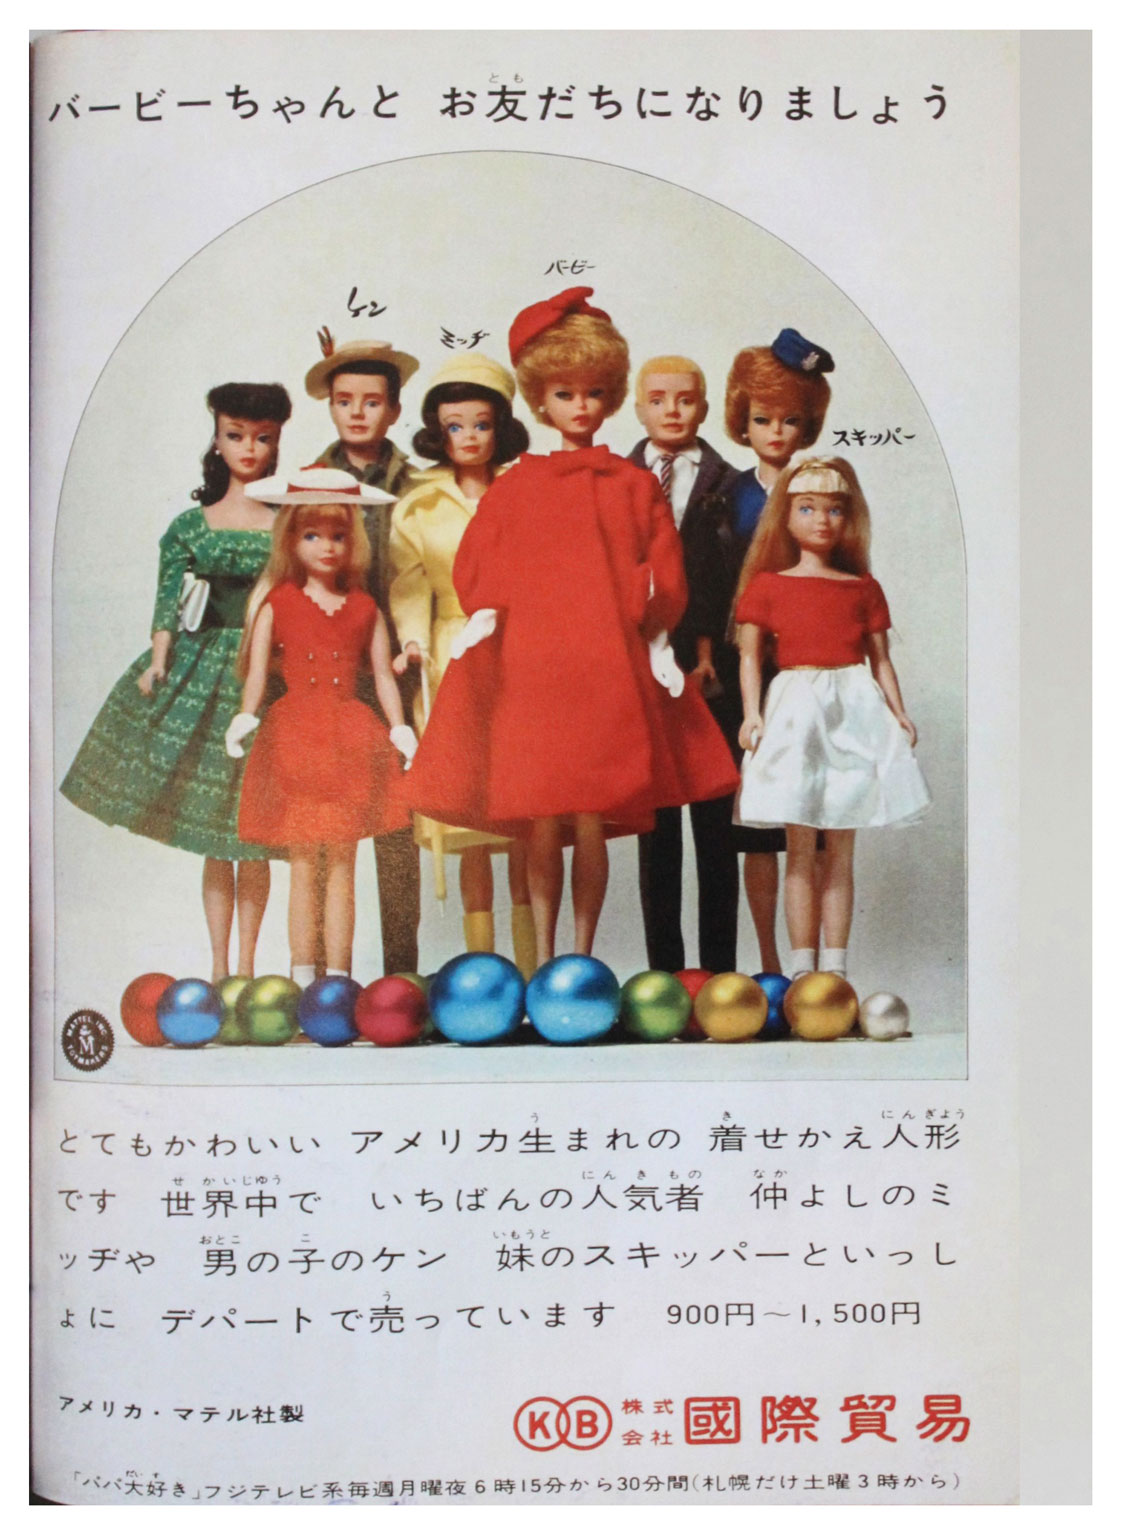 From 1964 Japanese Friend magazine (6th December)